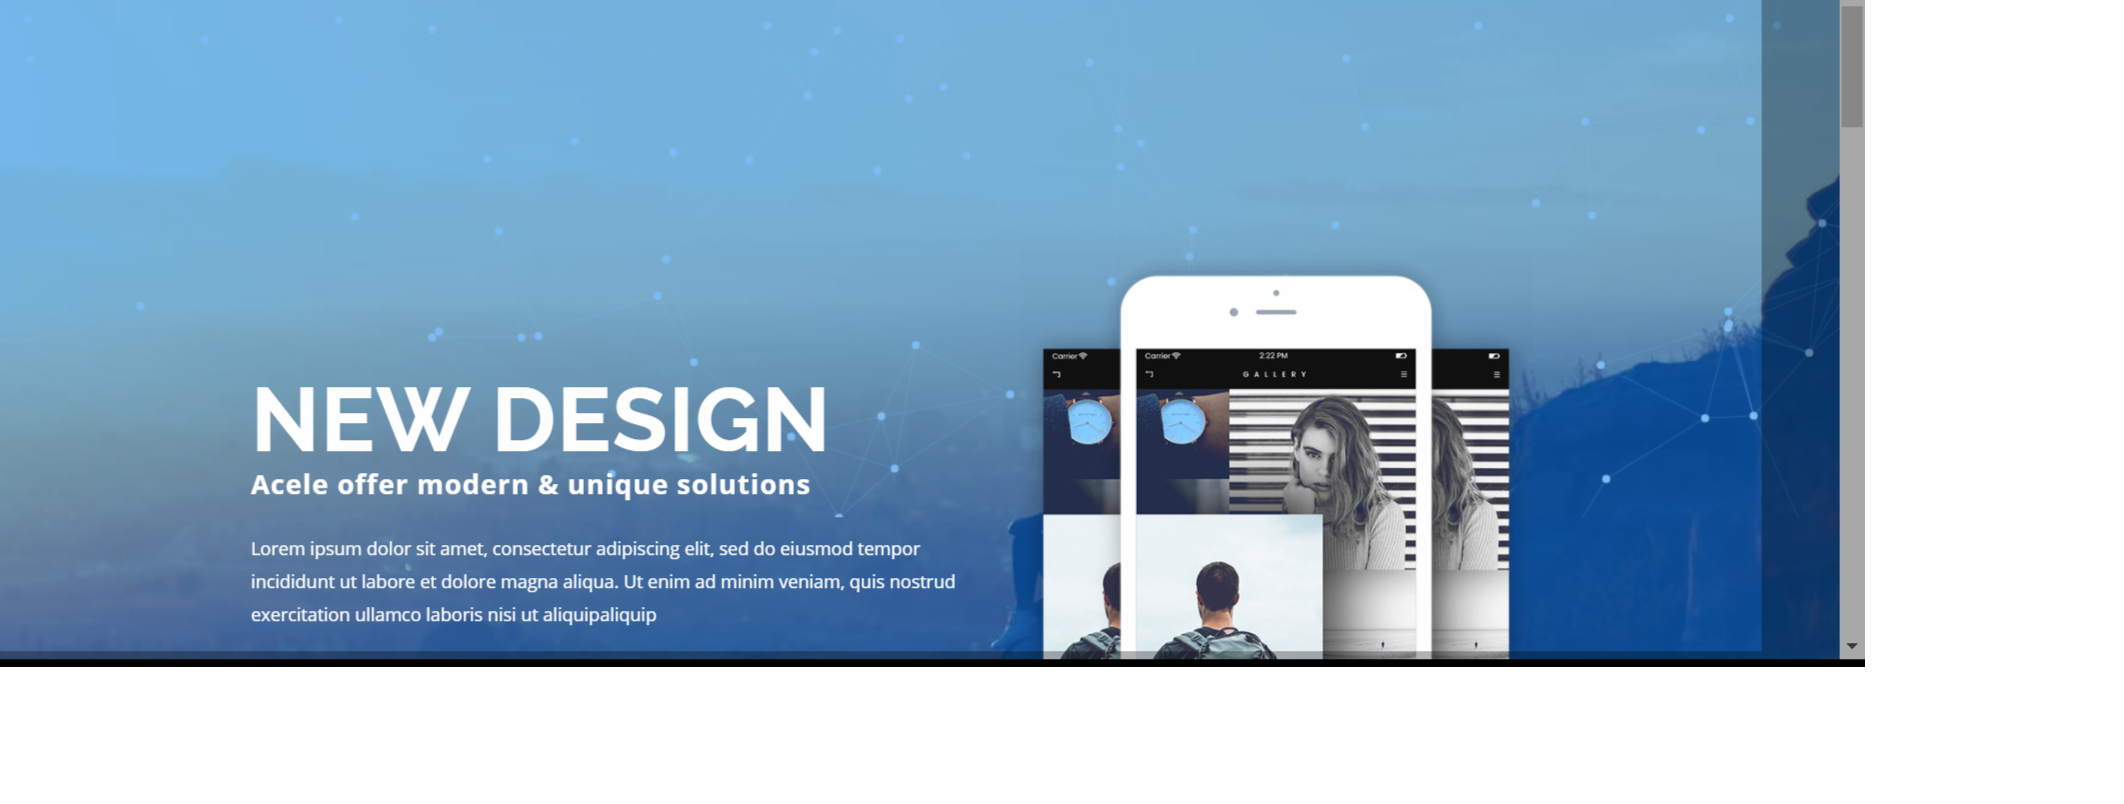 Acele-Technology-App-Software-WordPress-Theme-Preview-ThemeForest.png